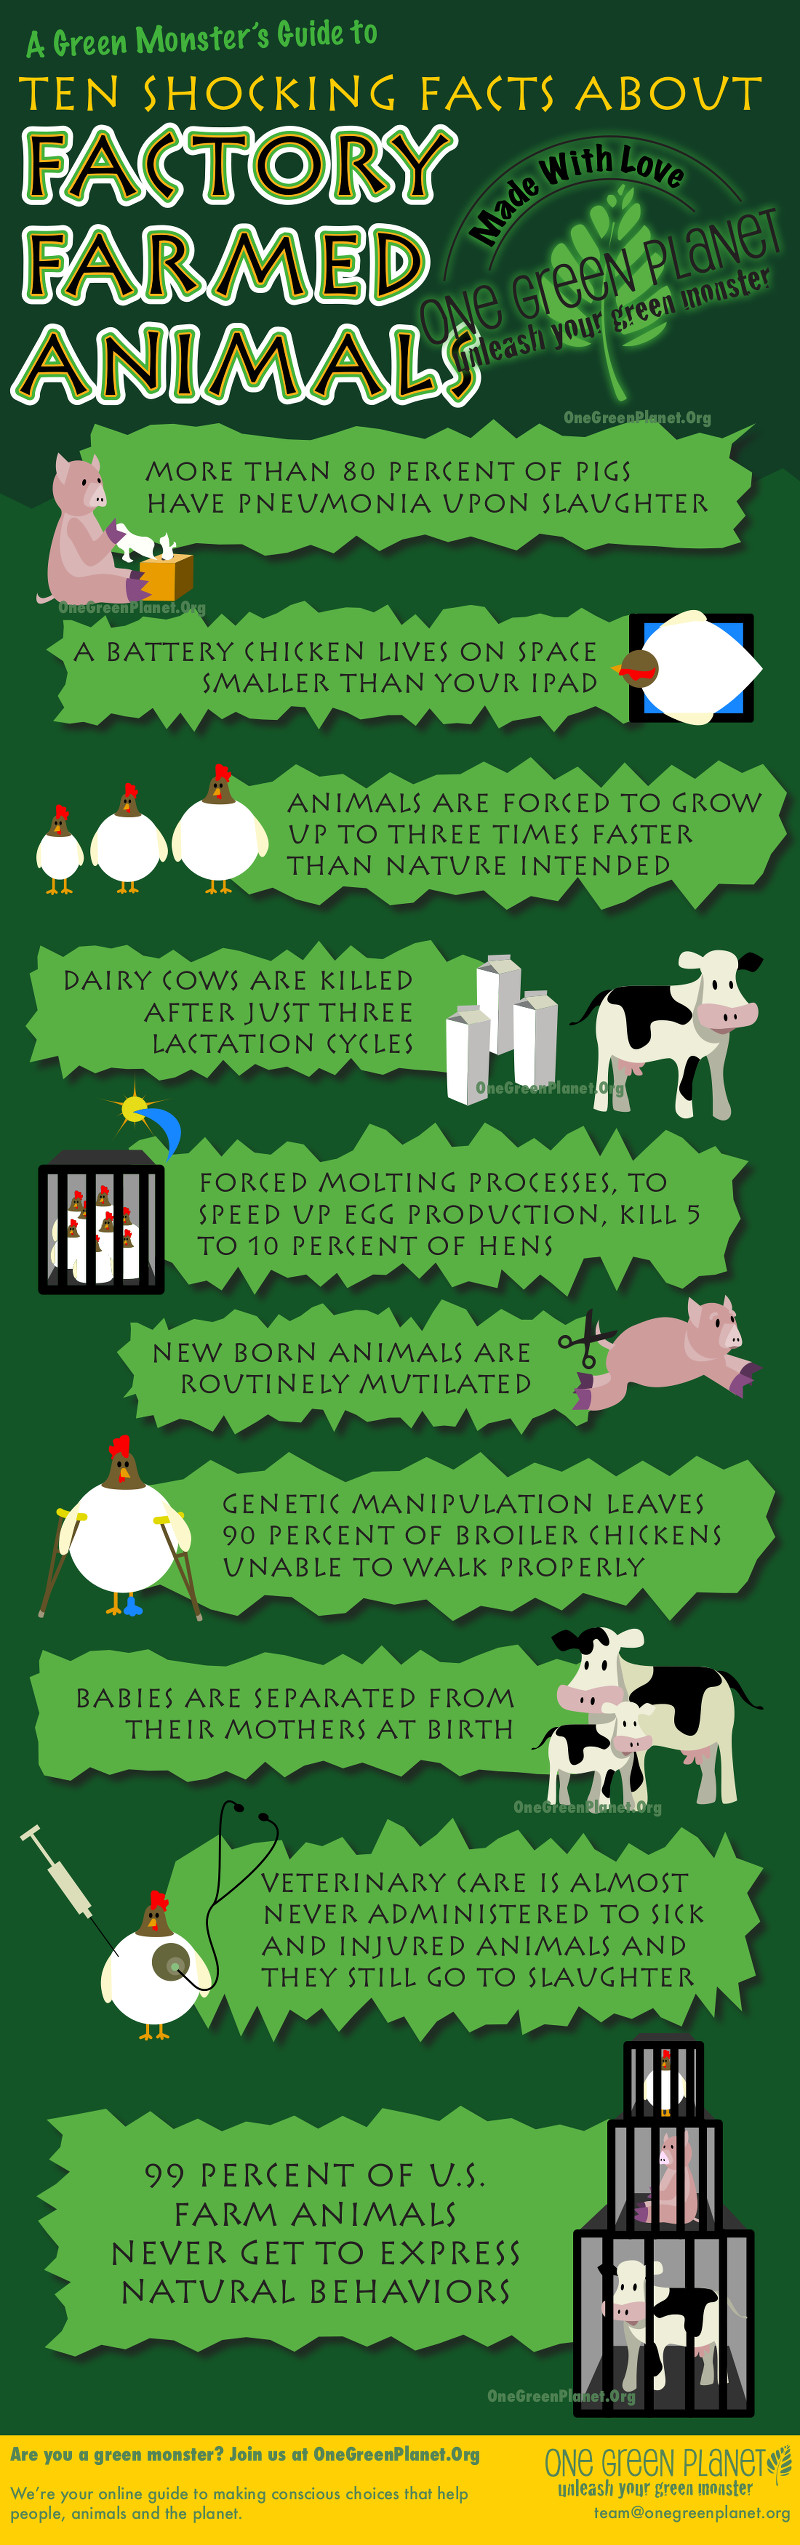 Shocking Facts About Factory Farmed Animals [INFOGRAPHIC]